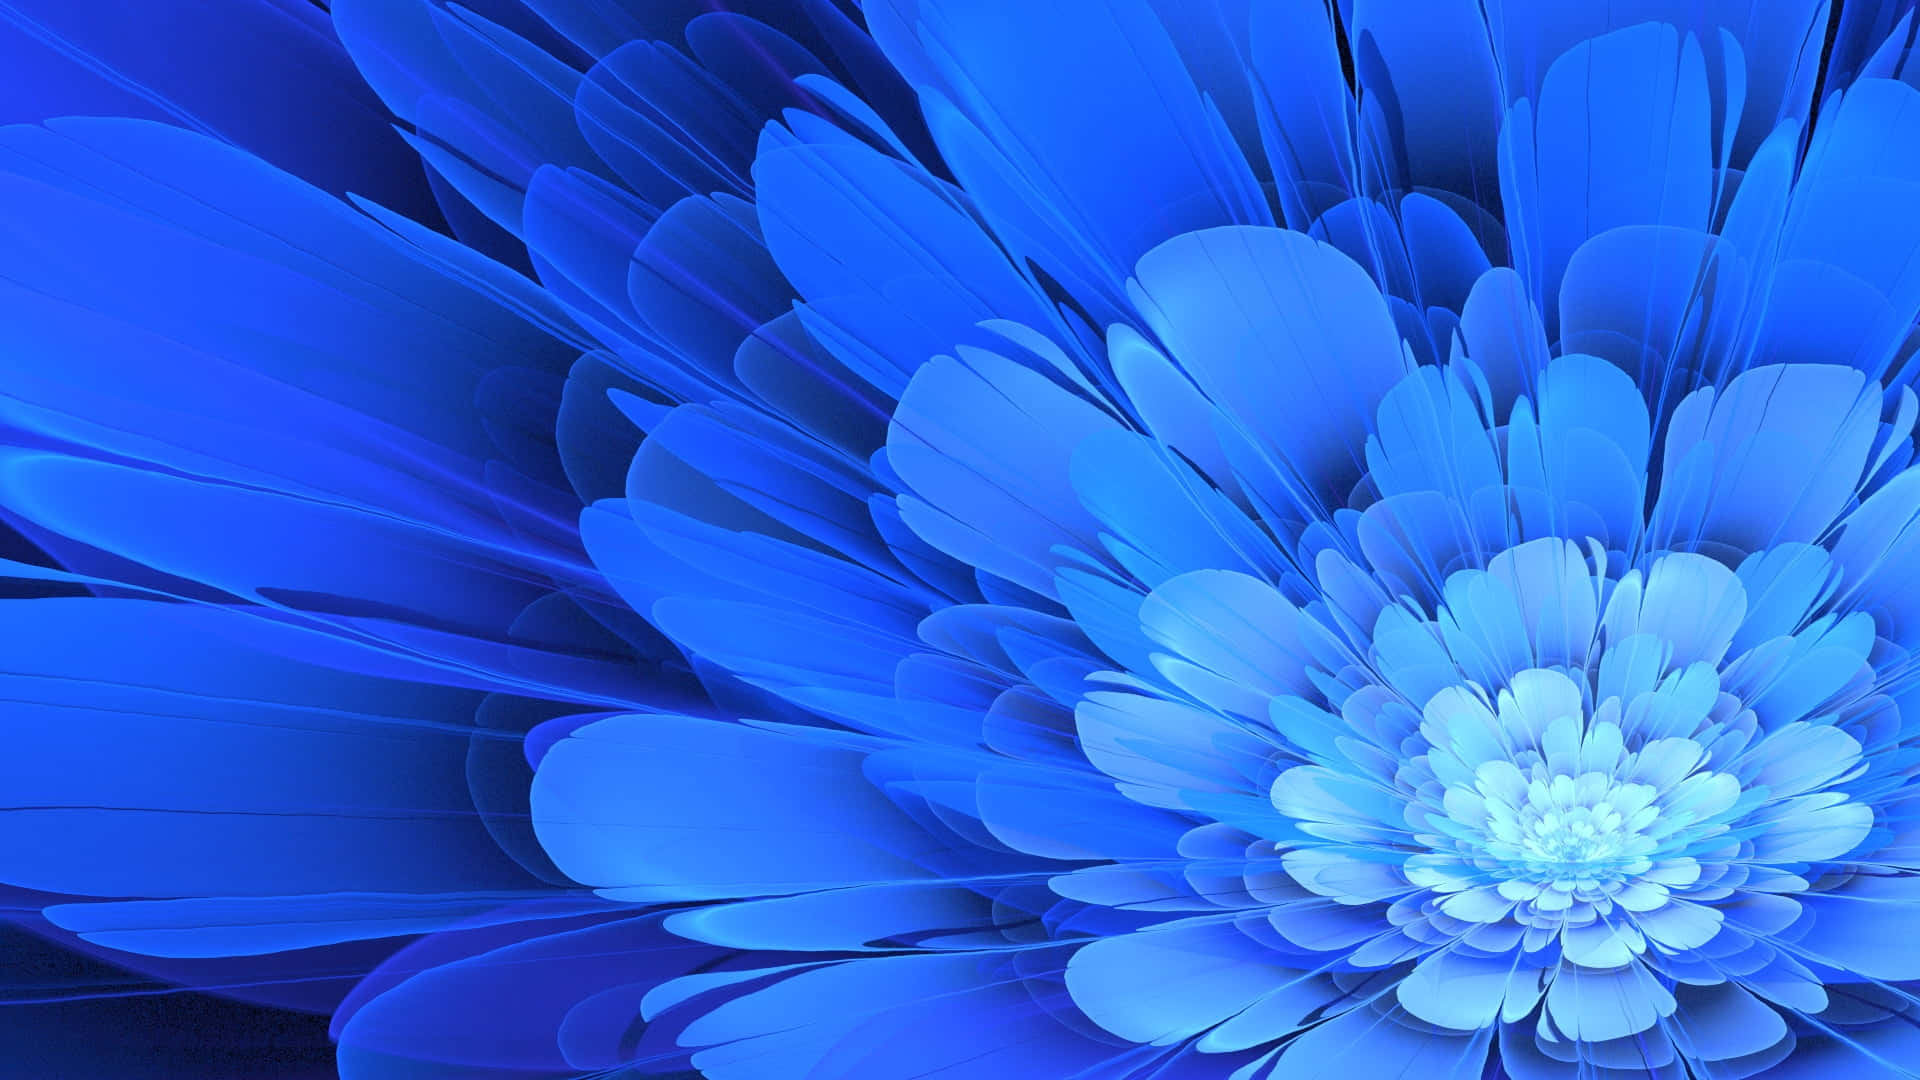 Animated Apophysis Blue Flower Picture